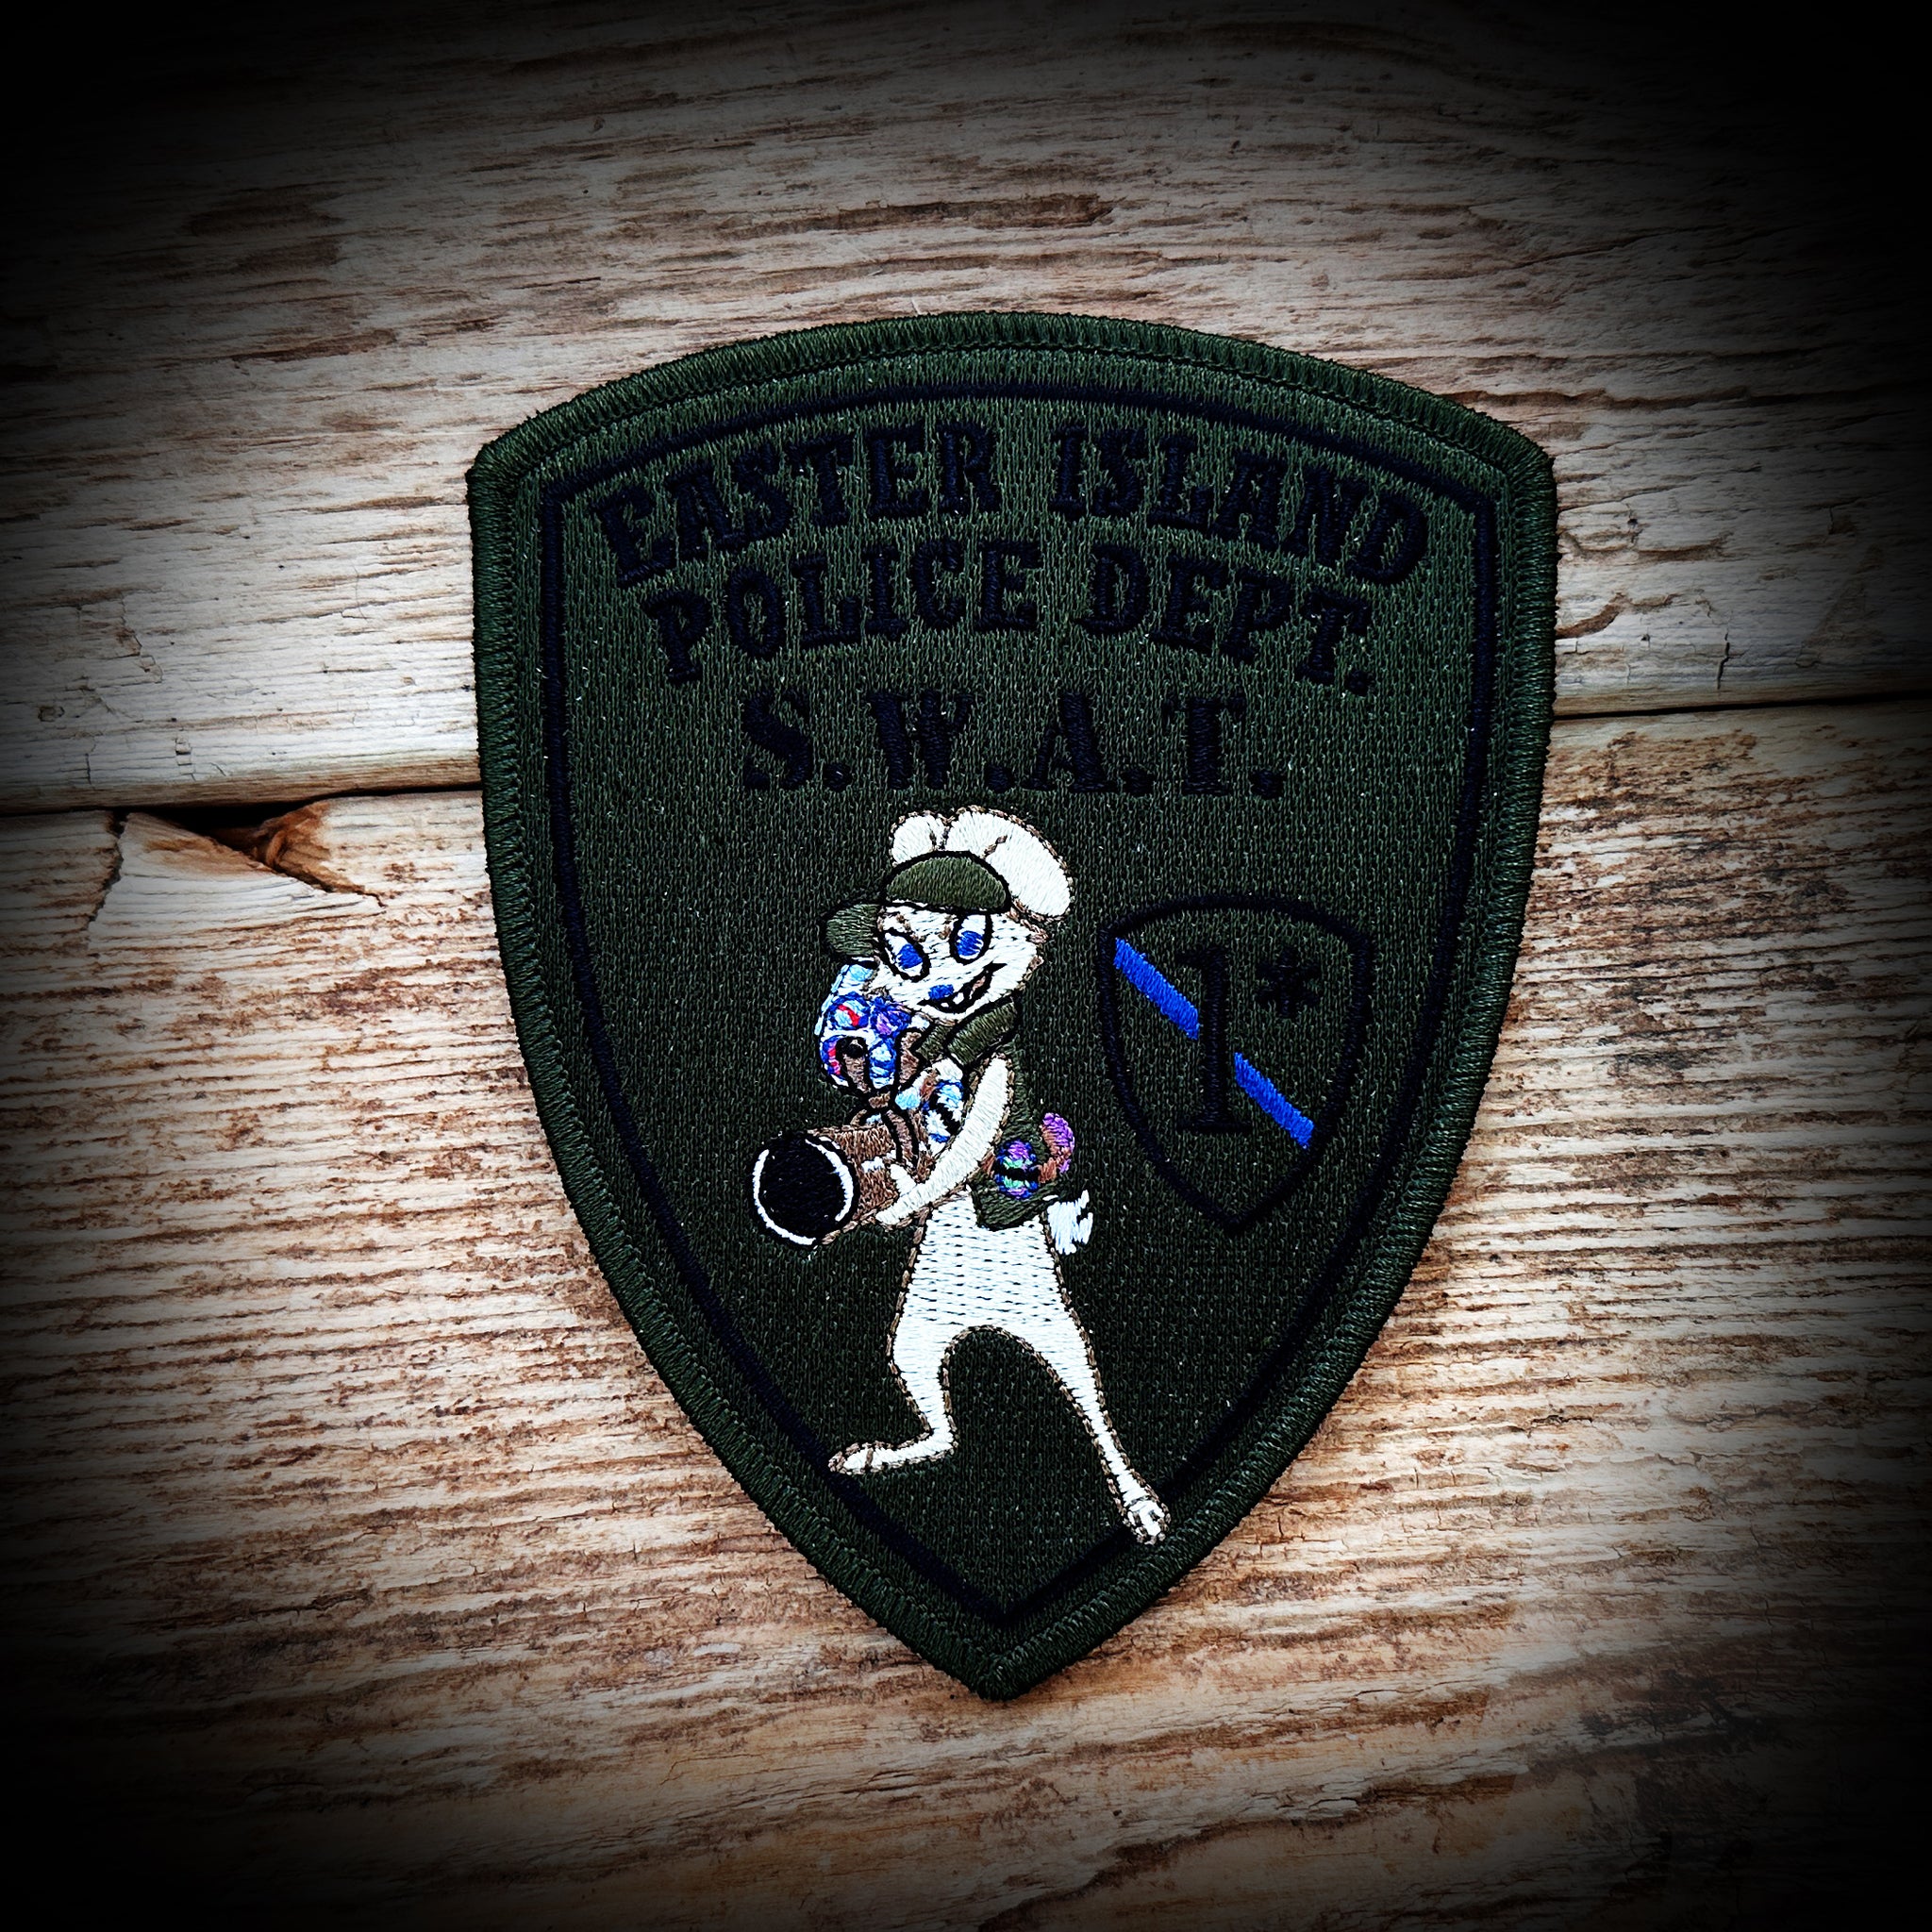 SWAT - Easter Island Police Department SWAT Patch